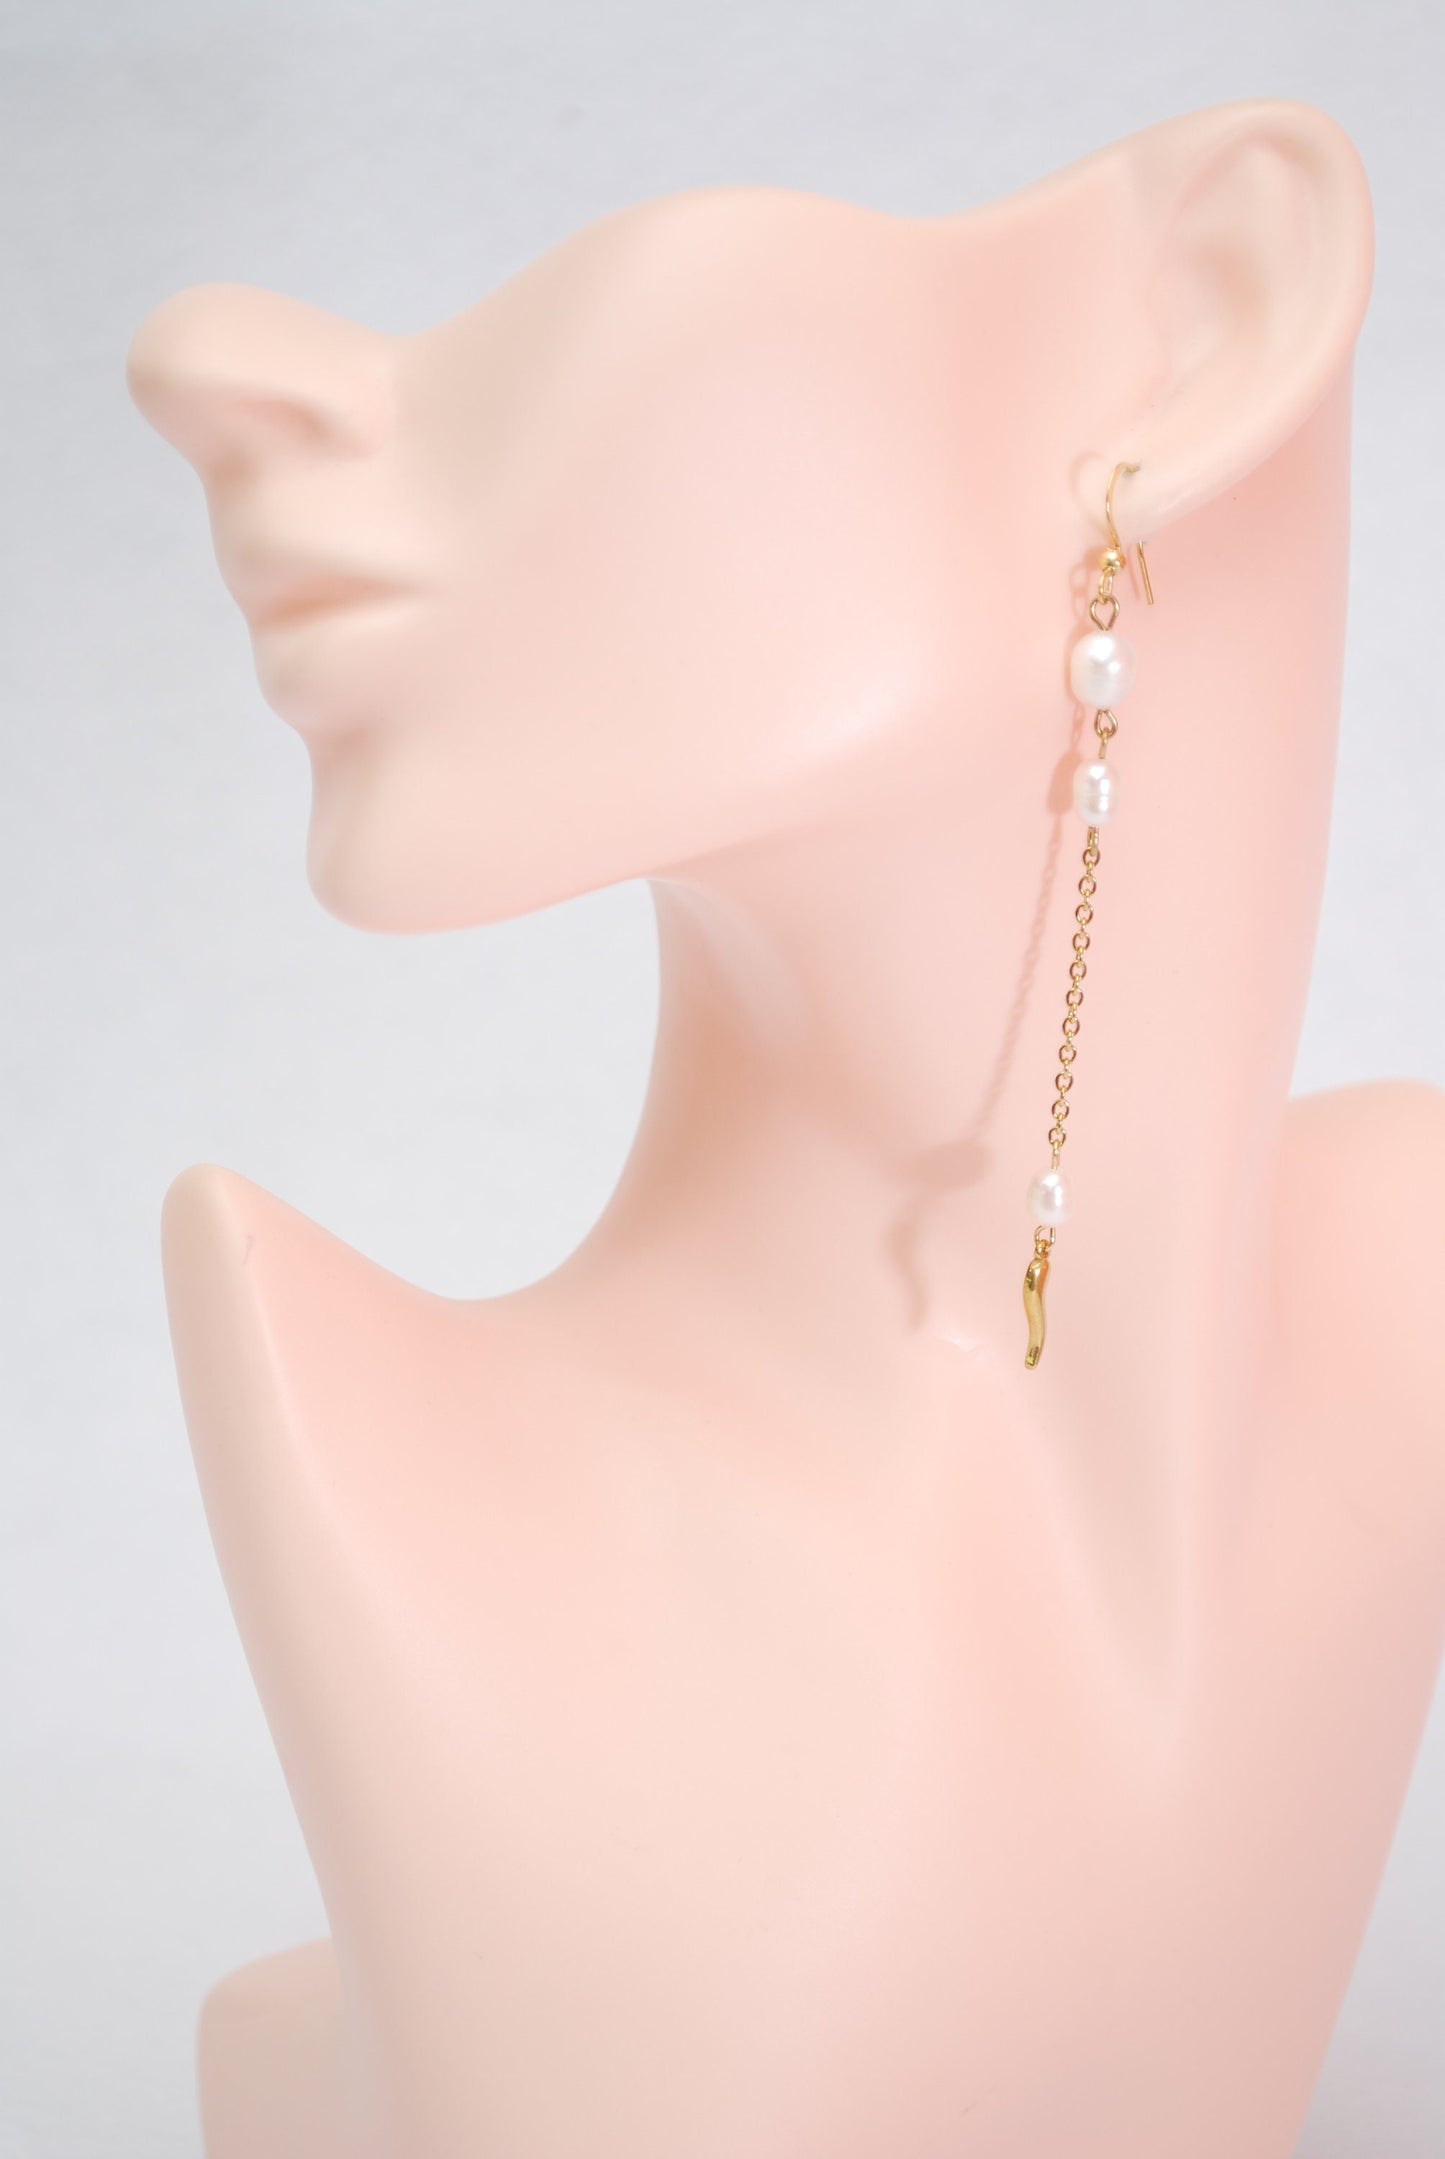 Ascetic Rustic Bohemian Earrings with Freshwater Pearls and Gold Plated Stainless Steel - 4 Inches Long